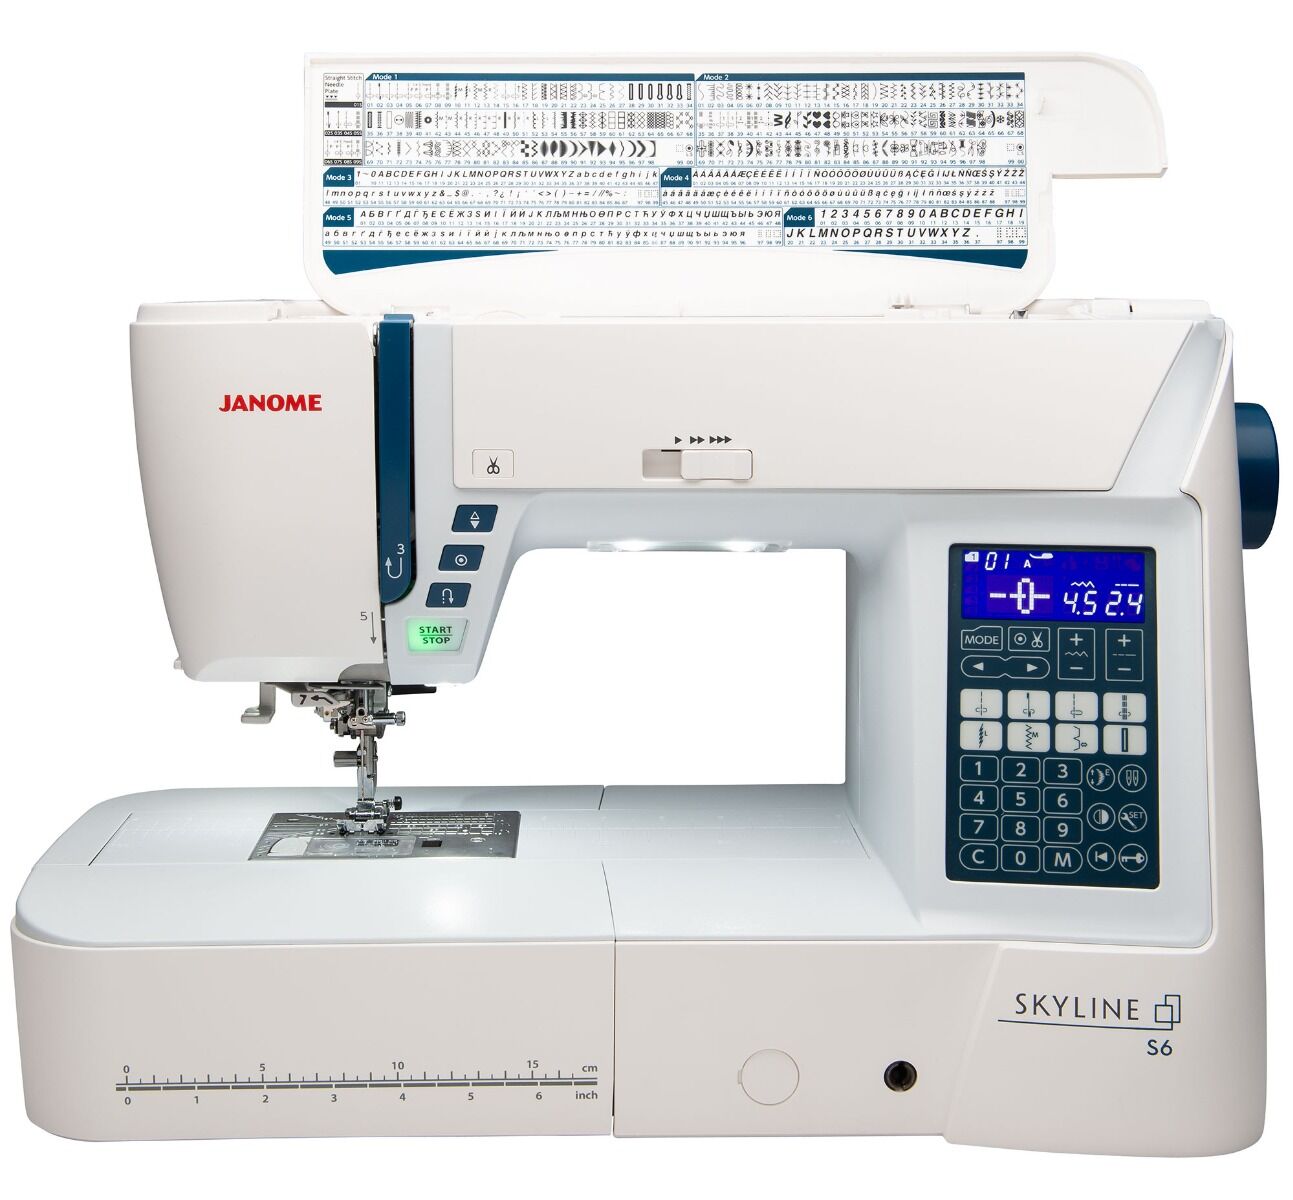 Janome Skyline S6 Sewing Machine - Front